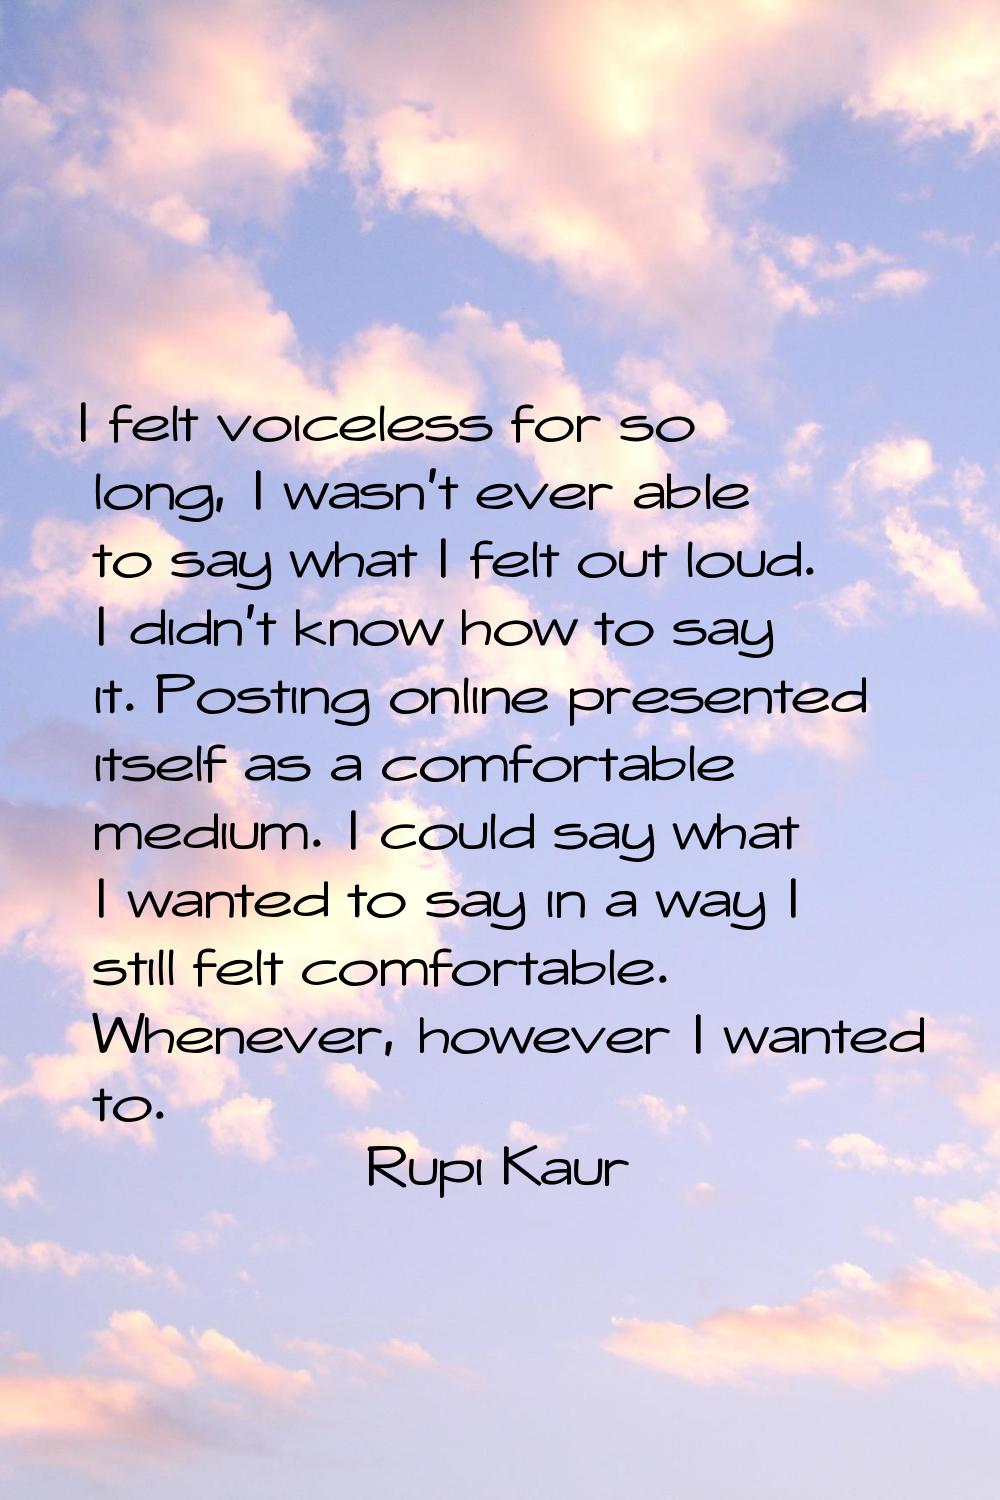 I felt voiceless for so long, I wasn't ever able to say what I felt out loud. I didn't know how to 